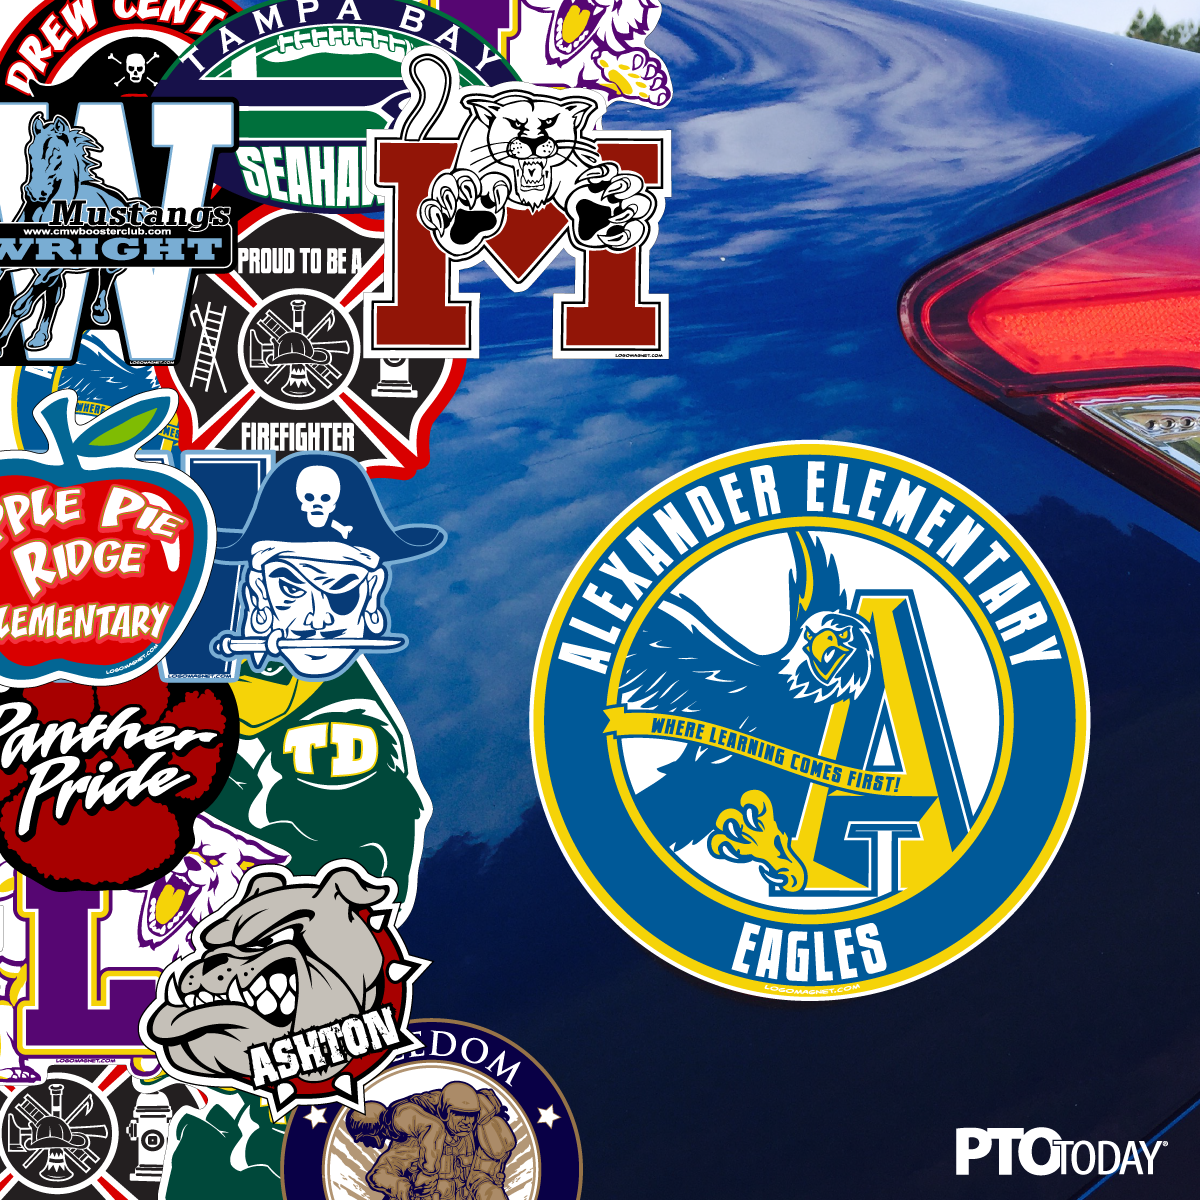 Win custom car magnets for your school